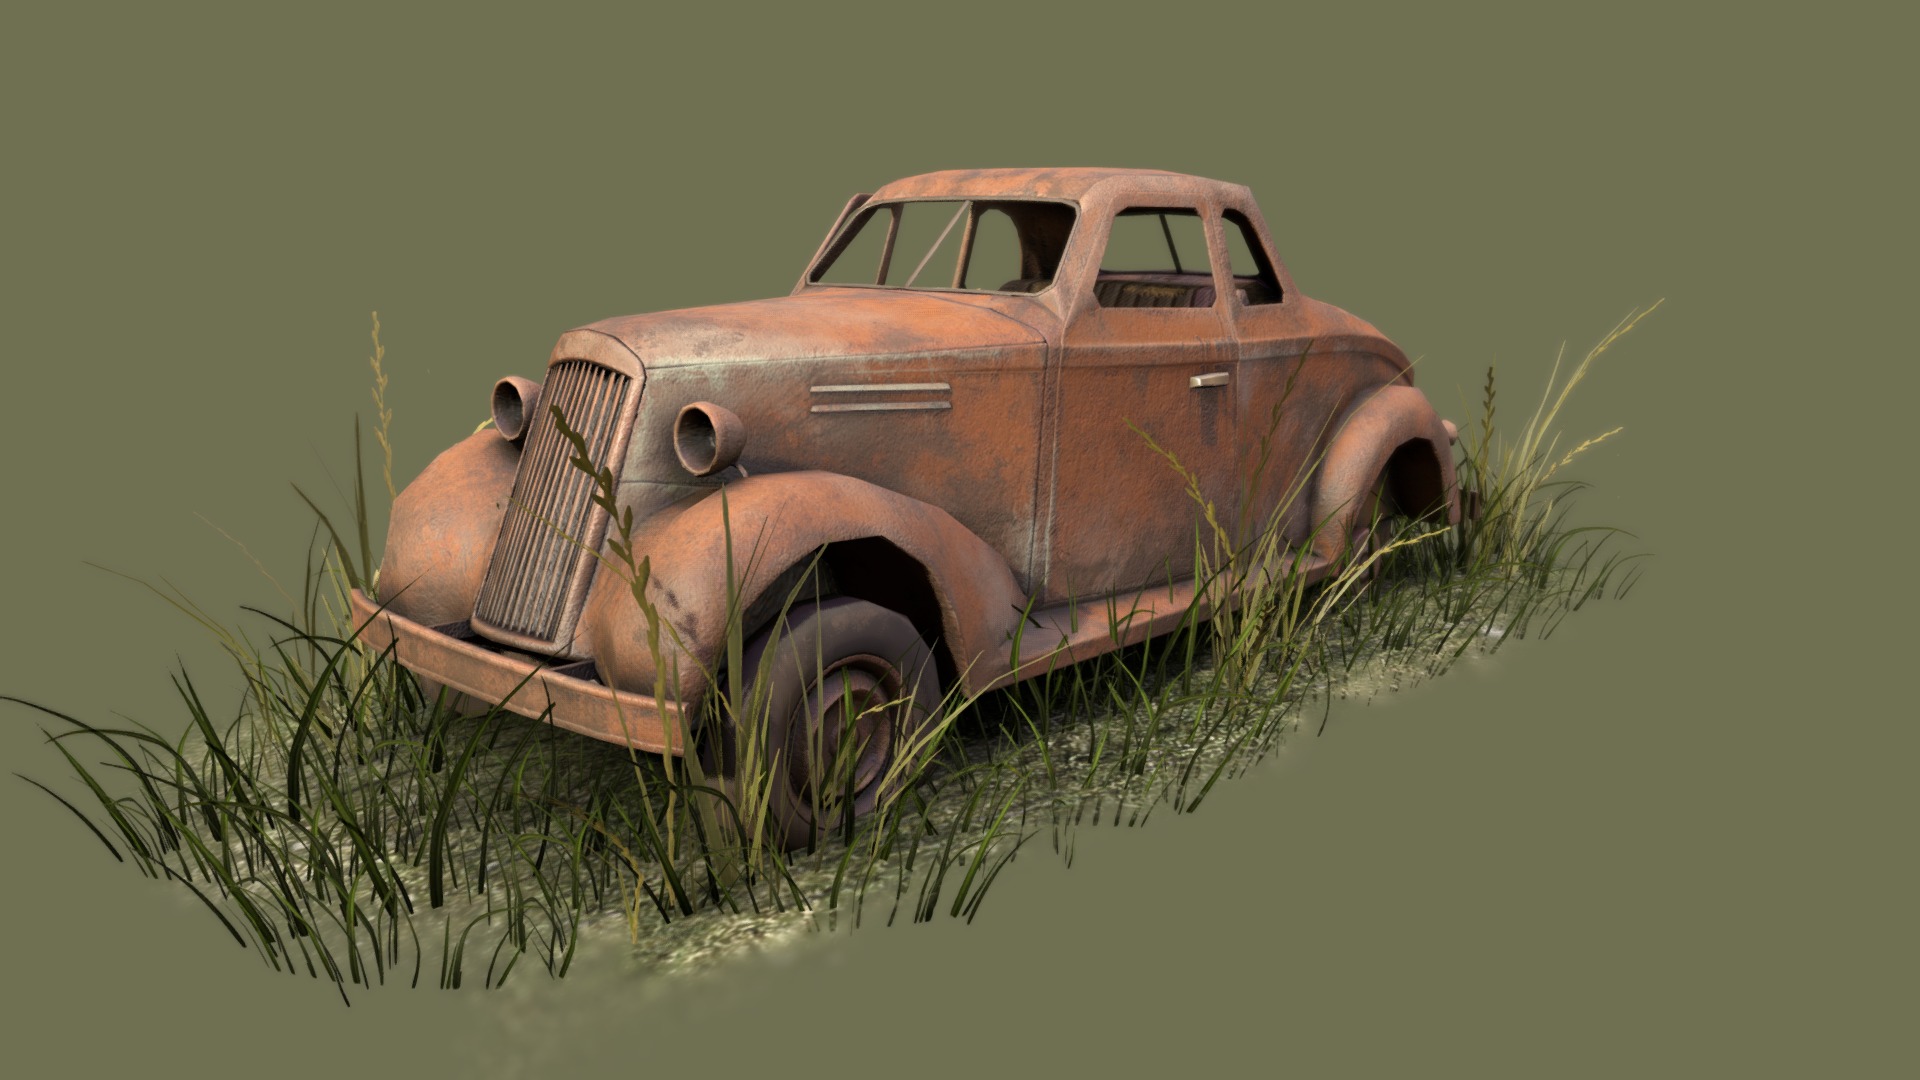 3D model Forgotten Car - This is a 3D model of the Forgotten Car. The 3D model is about a car in the grass.